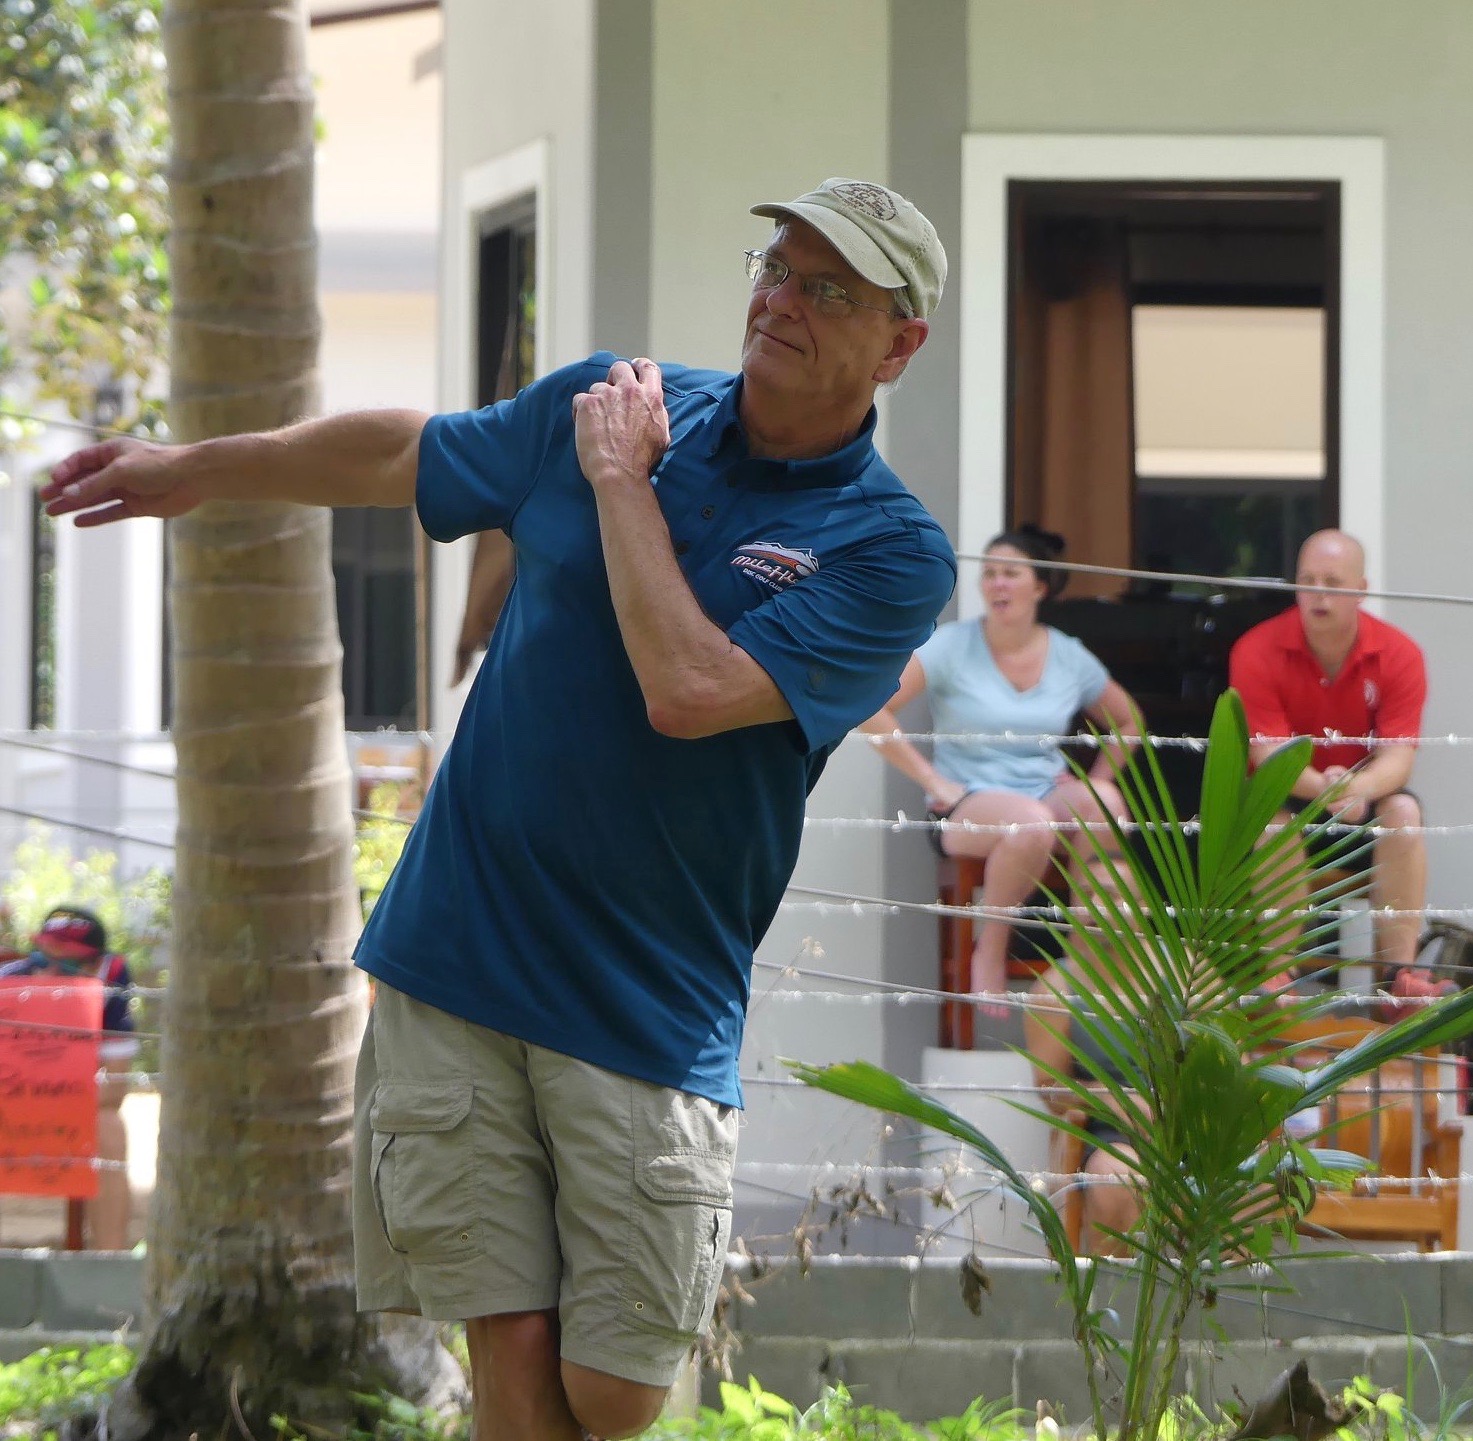 Get to Know the 6 Candidates for the PDGA Global Board of Directors Professional Disc Golf Association picture